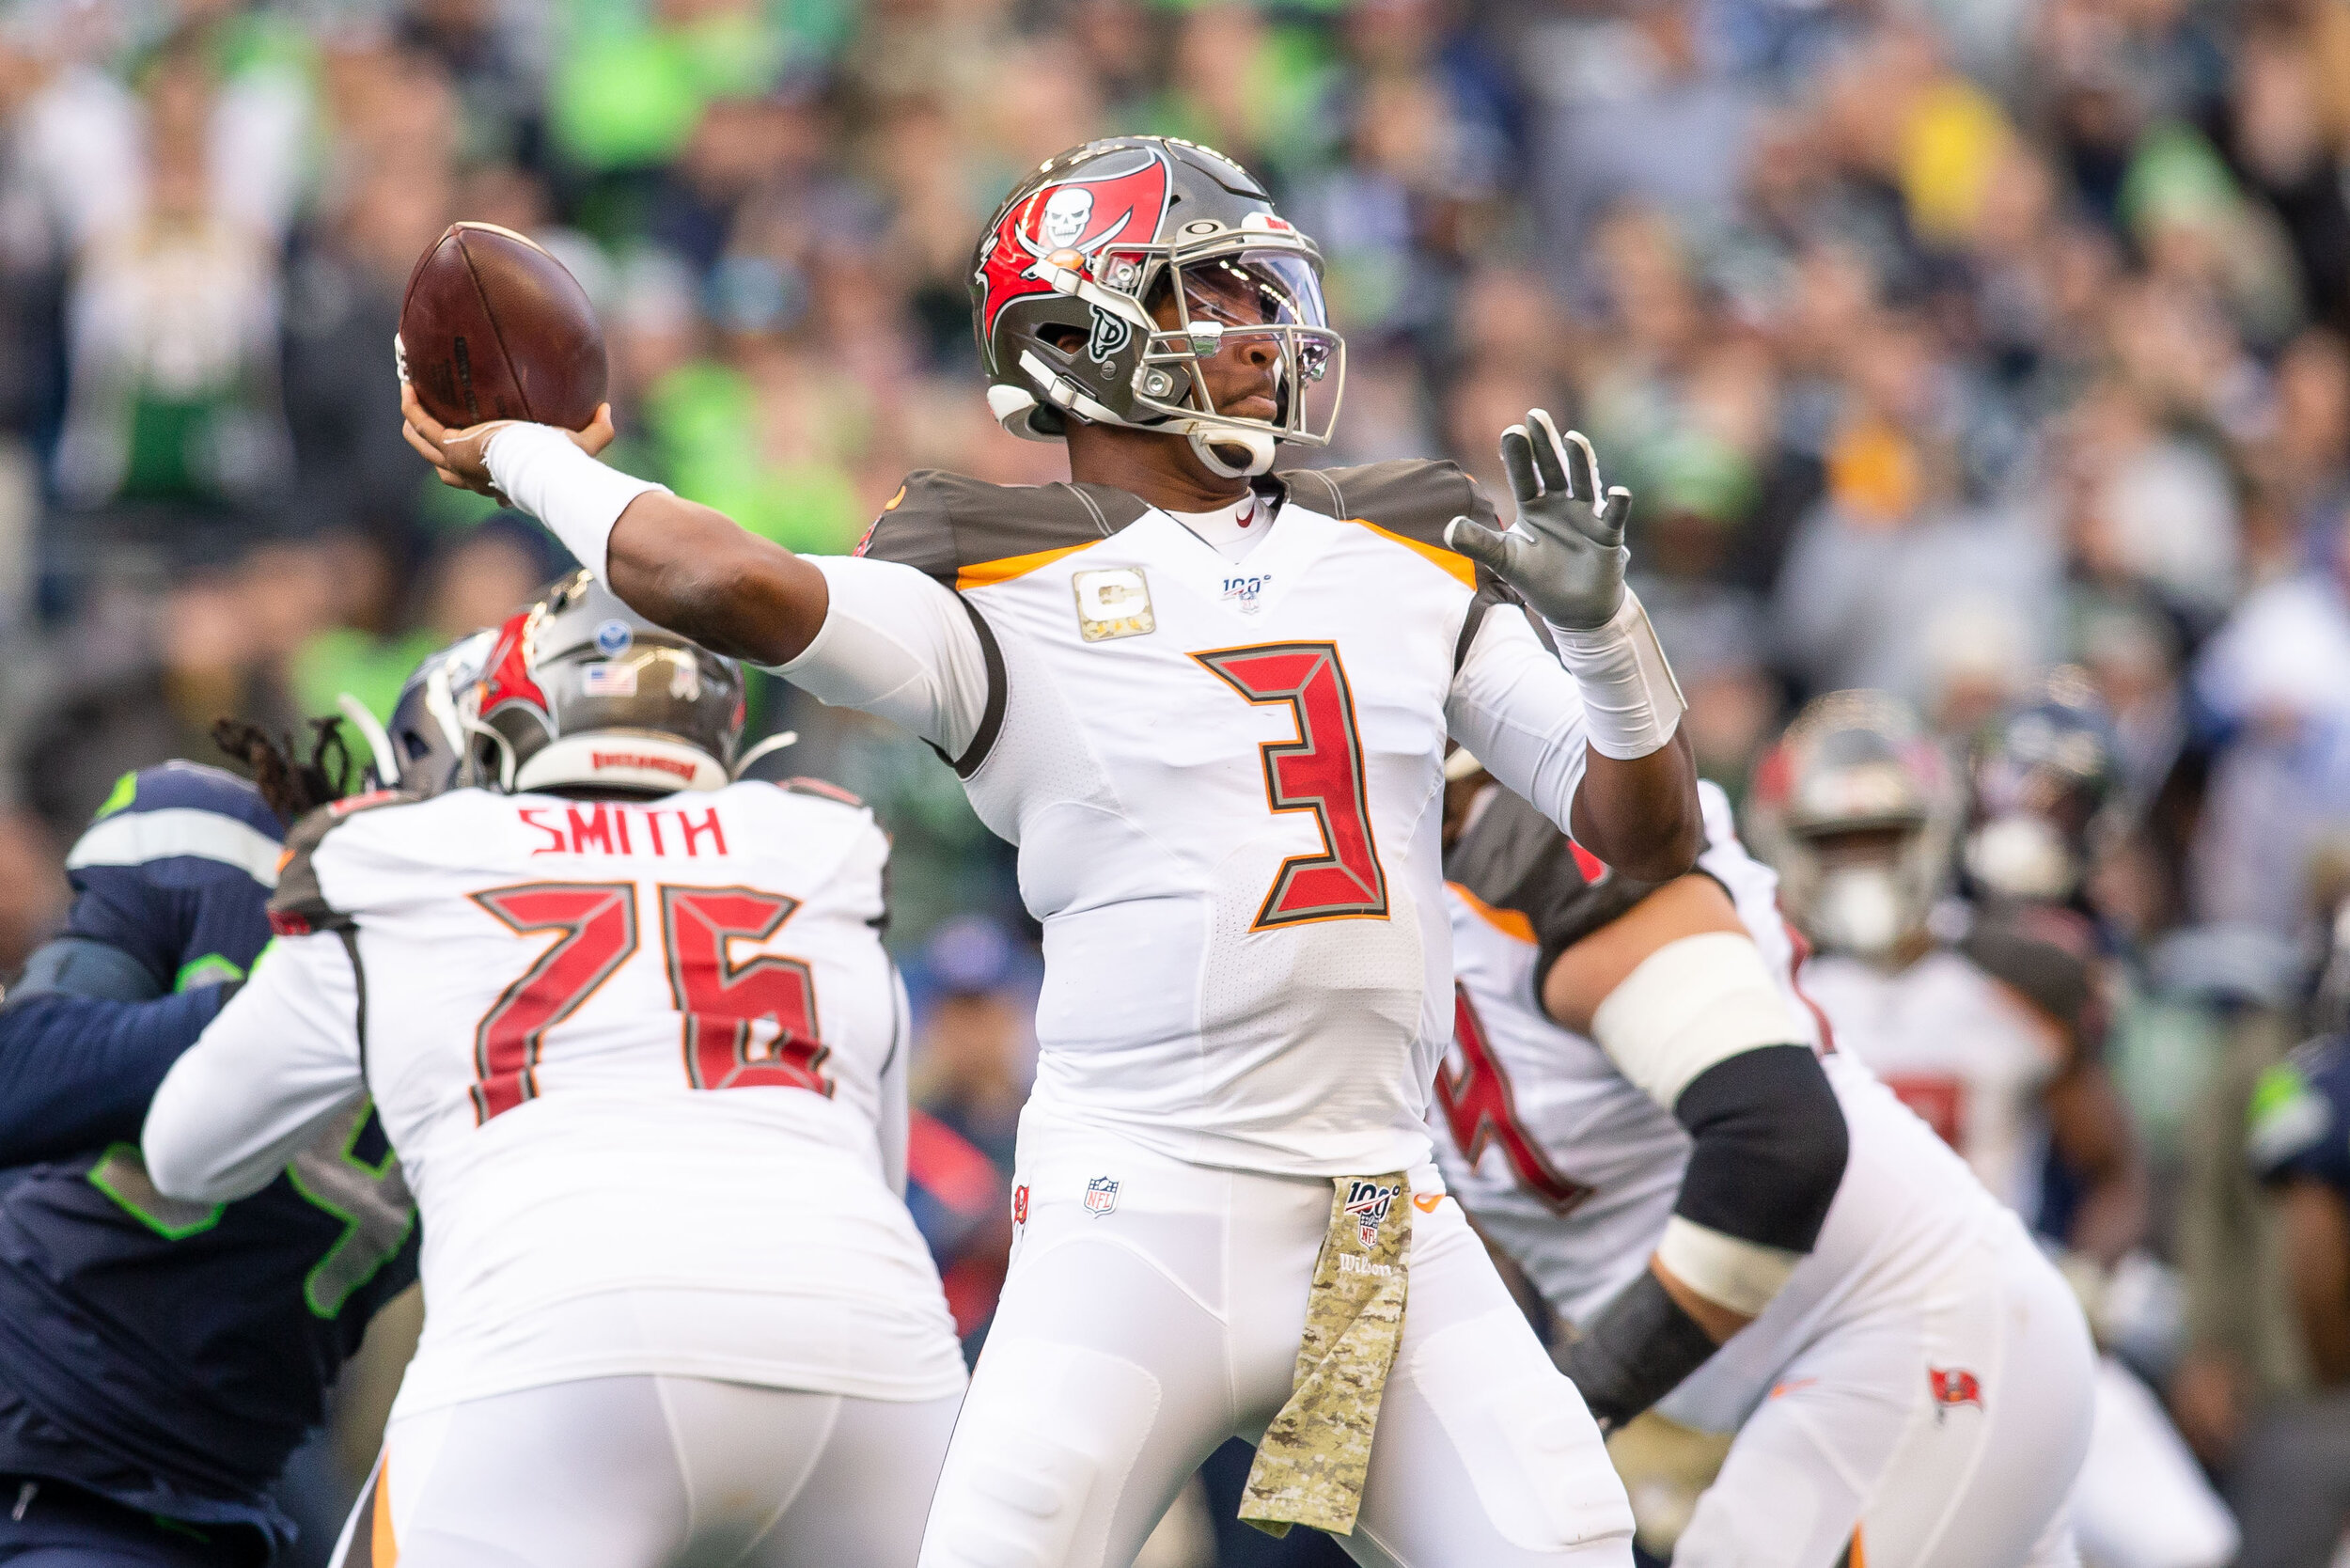  Tampa Bay Buccaneers quarterback Jameis Winston (3) passes the ball during the third quarter of an NFL football game against the Seattle Seahawks, Sunday, Nov. 3, 2019, in Seattle. Seattle defeated Tampa Bay 40-34 in overtime. (Matt Ferris/Image of 